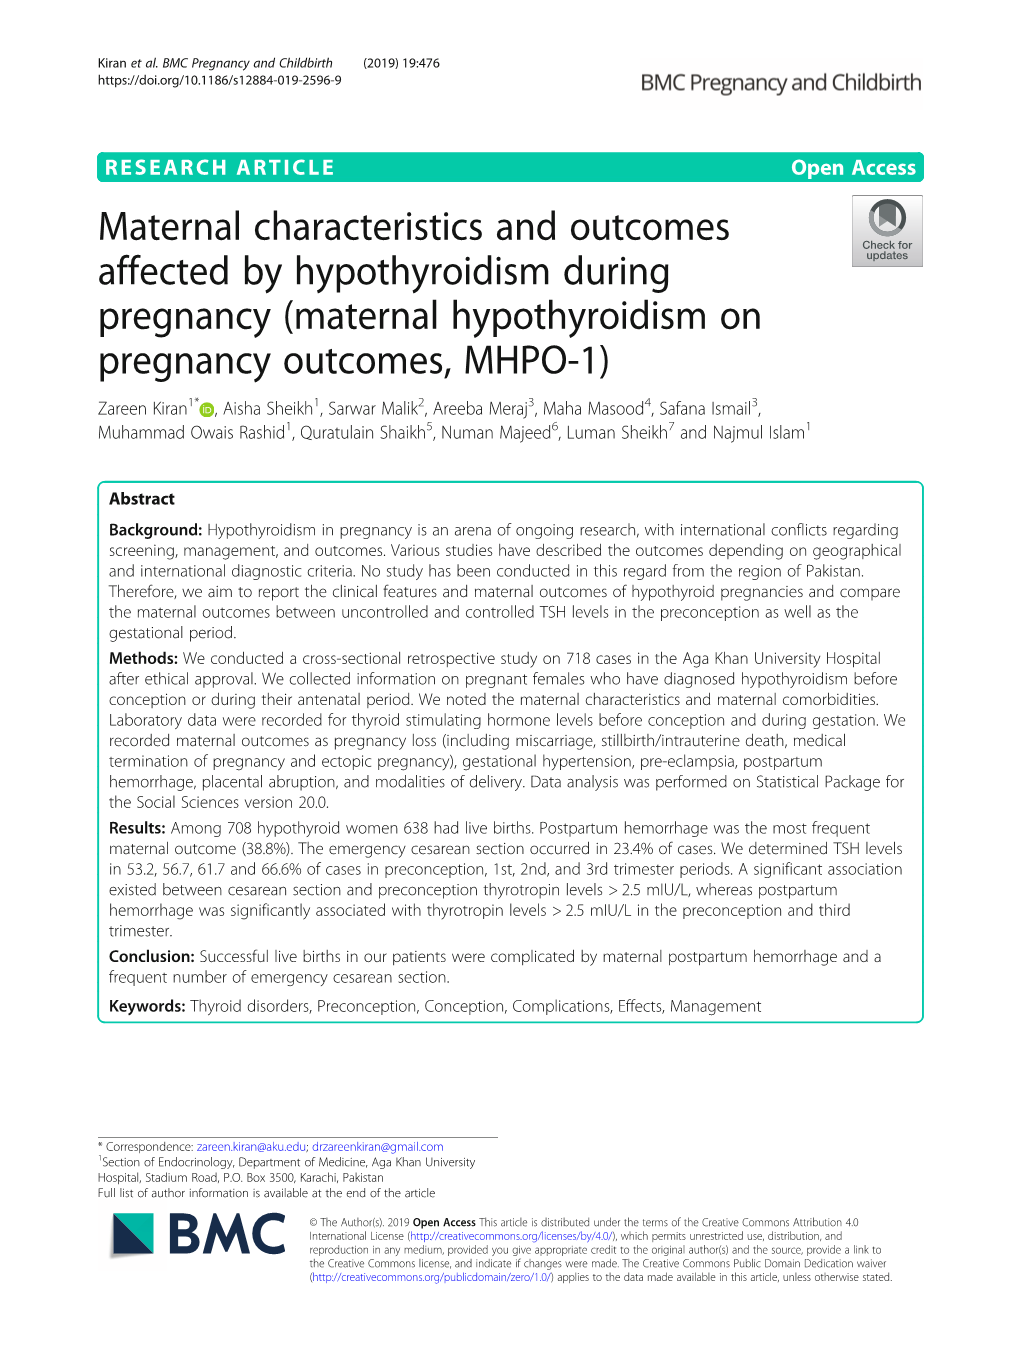 Maternal Characteristics and Outcomes Affected by Hypothyroidism During